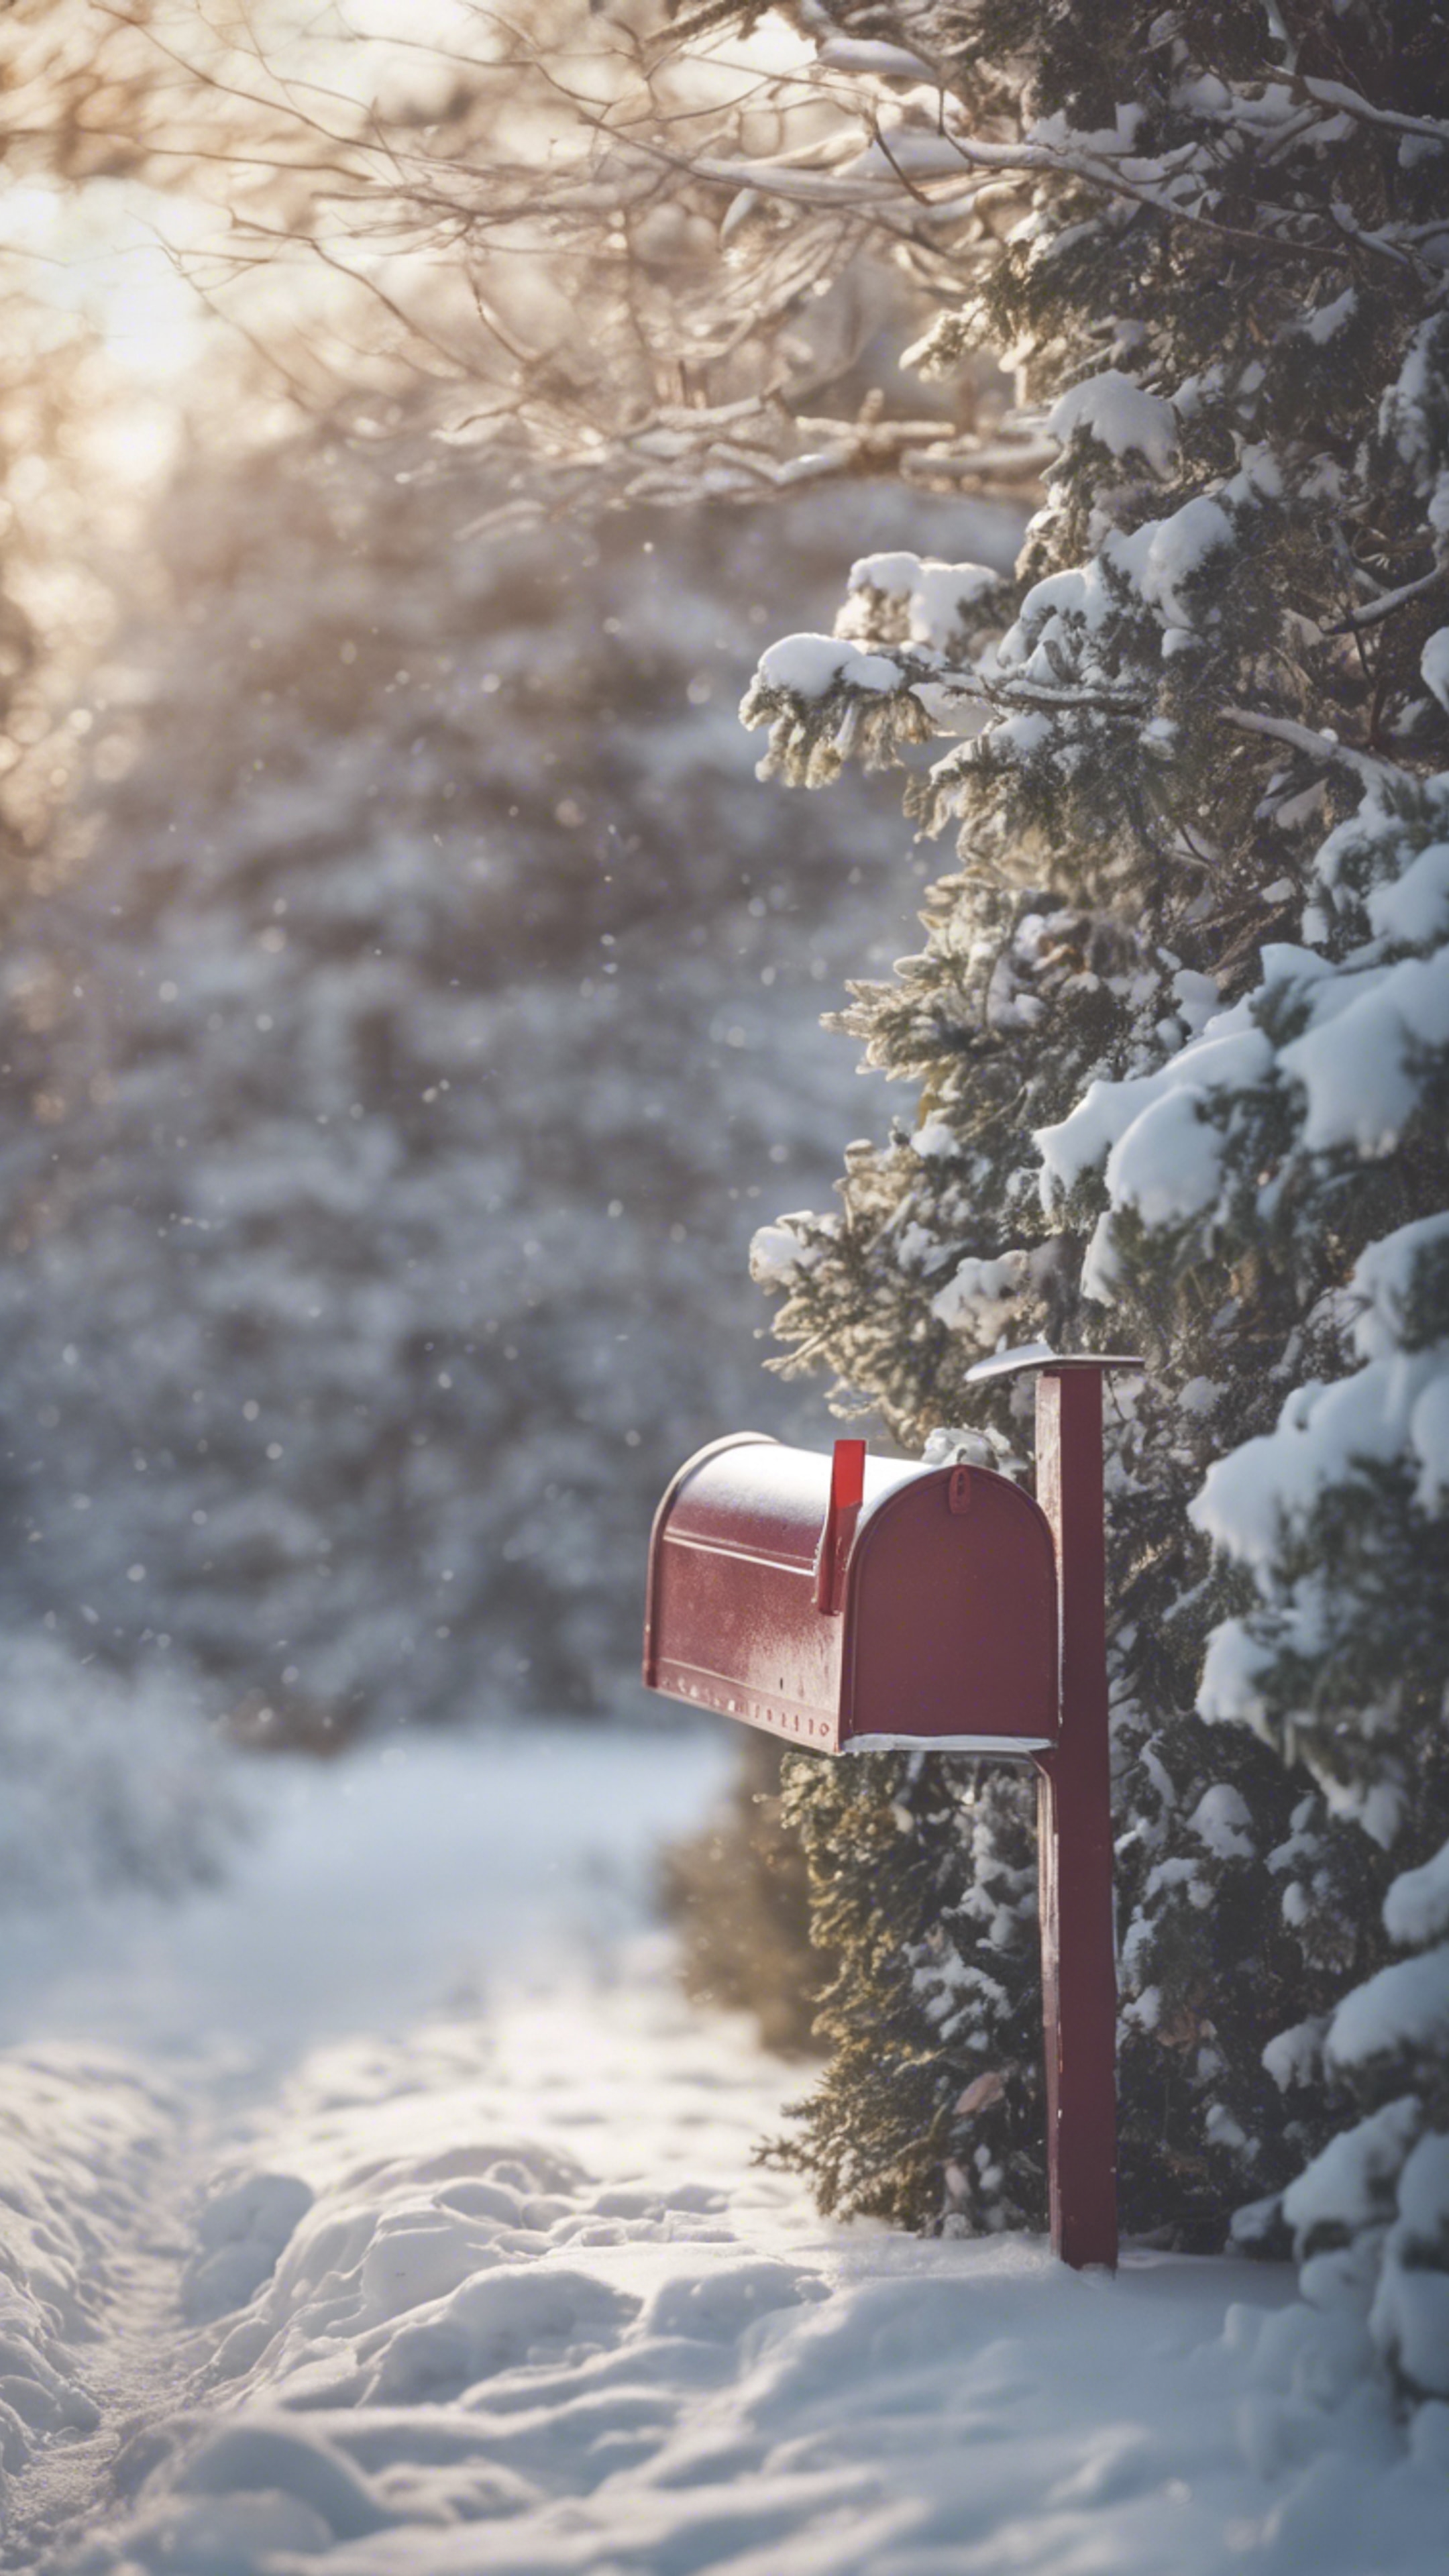 A lone mailbox standing forlorn at the end of a long, snowy driveway.壁紙[391816613dc64c2ea3f3]